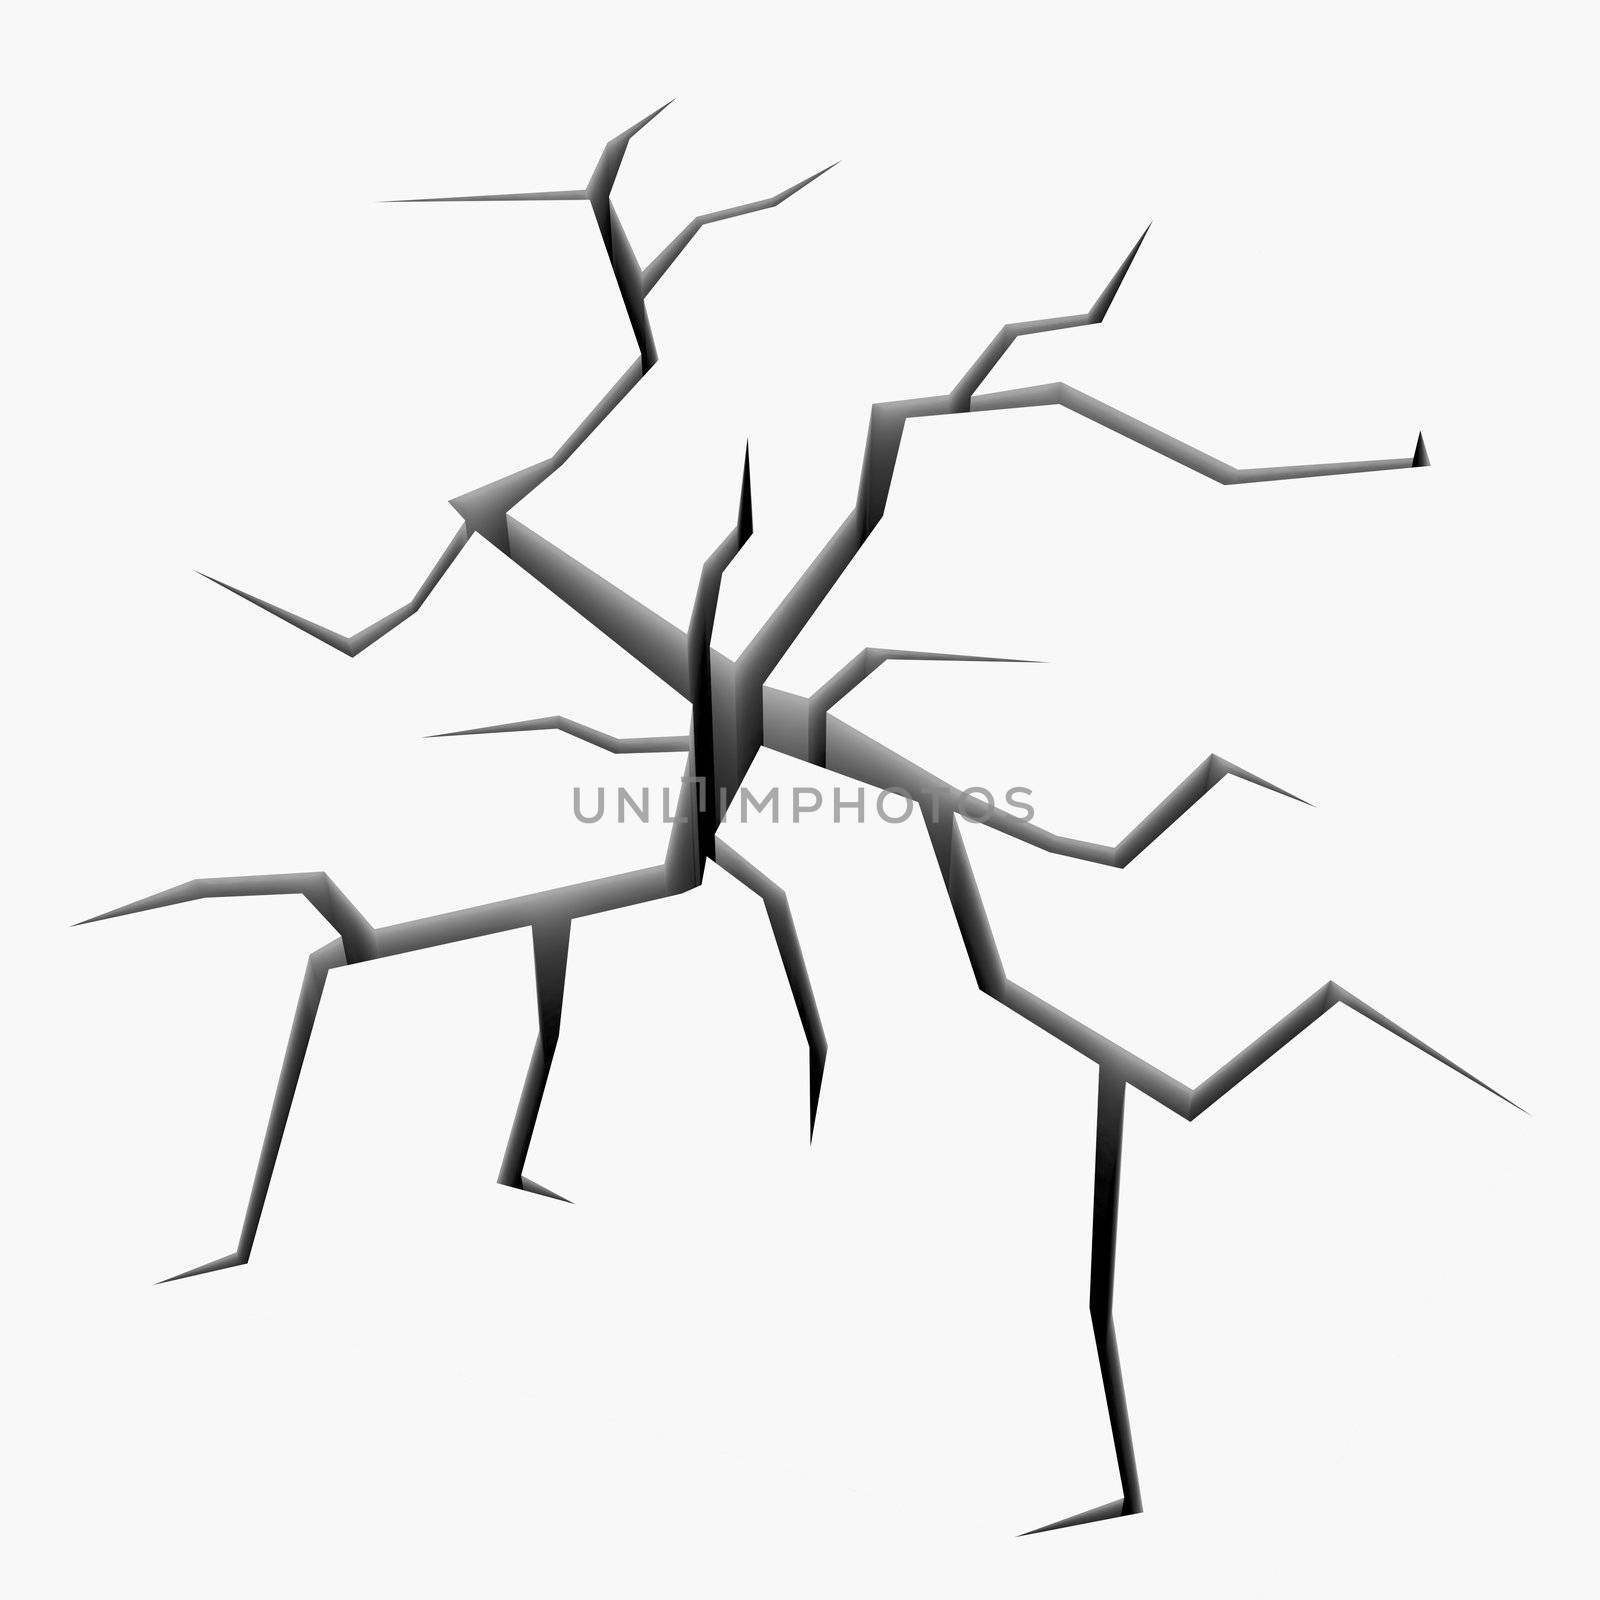 The crack in the white plane. Isolated render on a white background